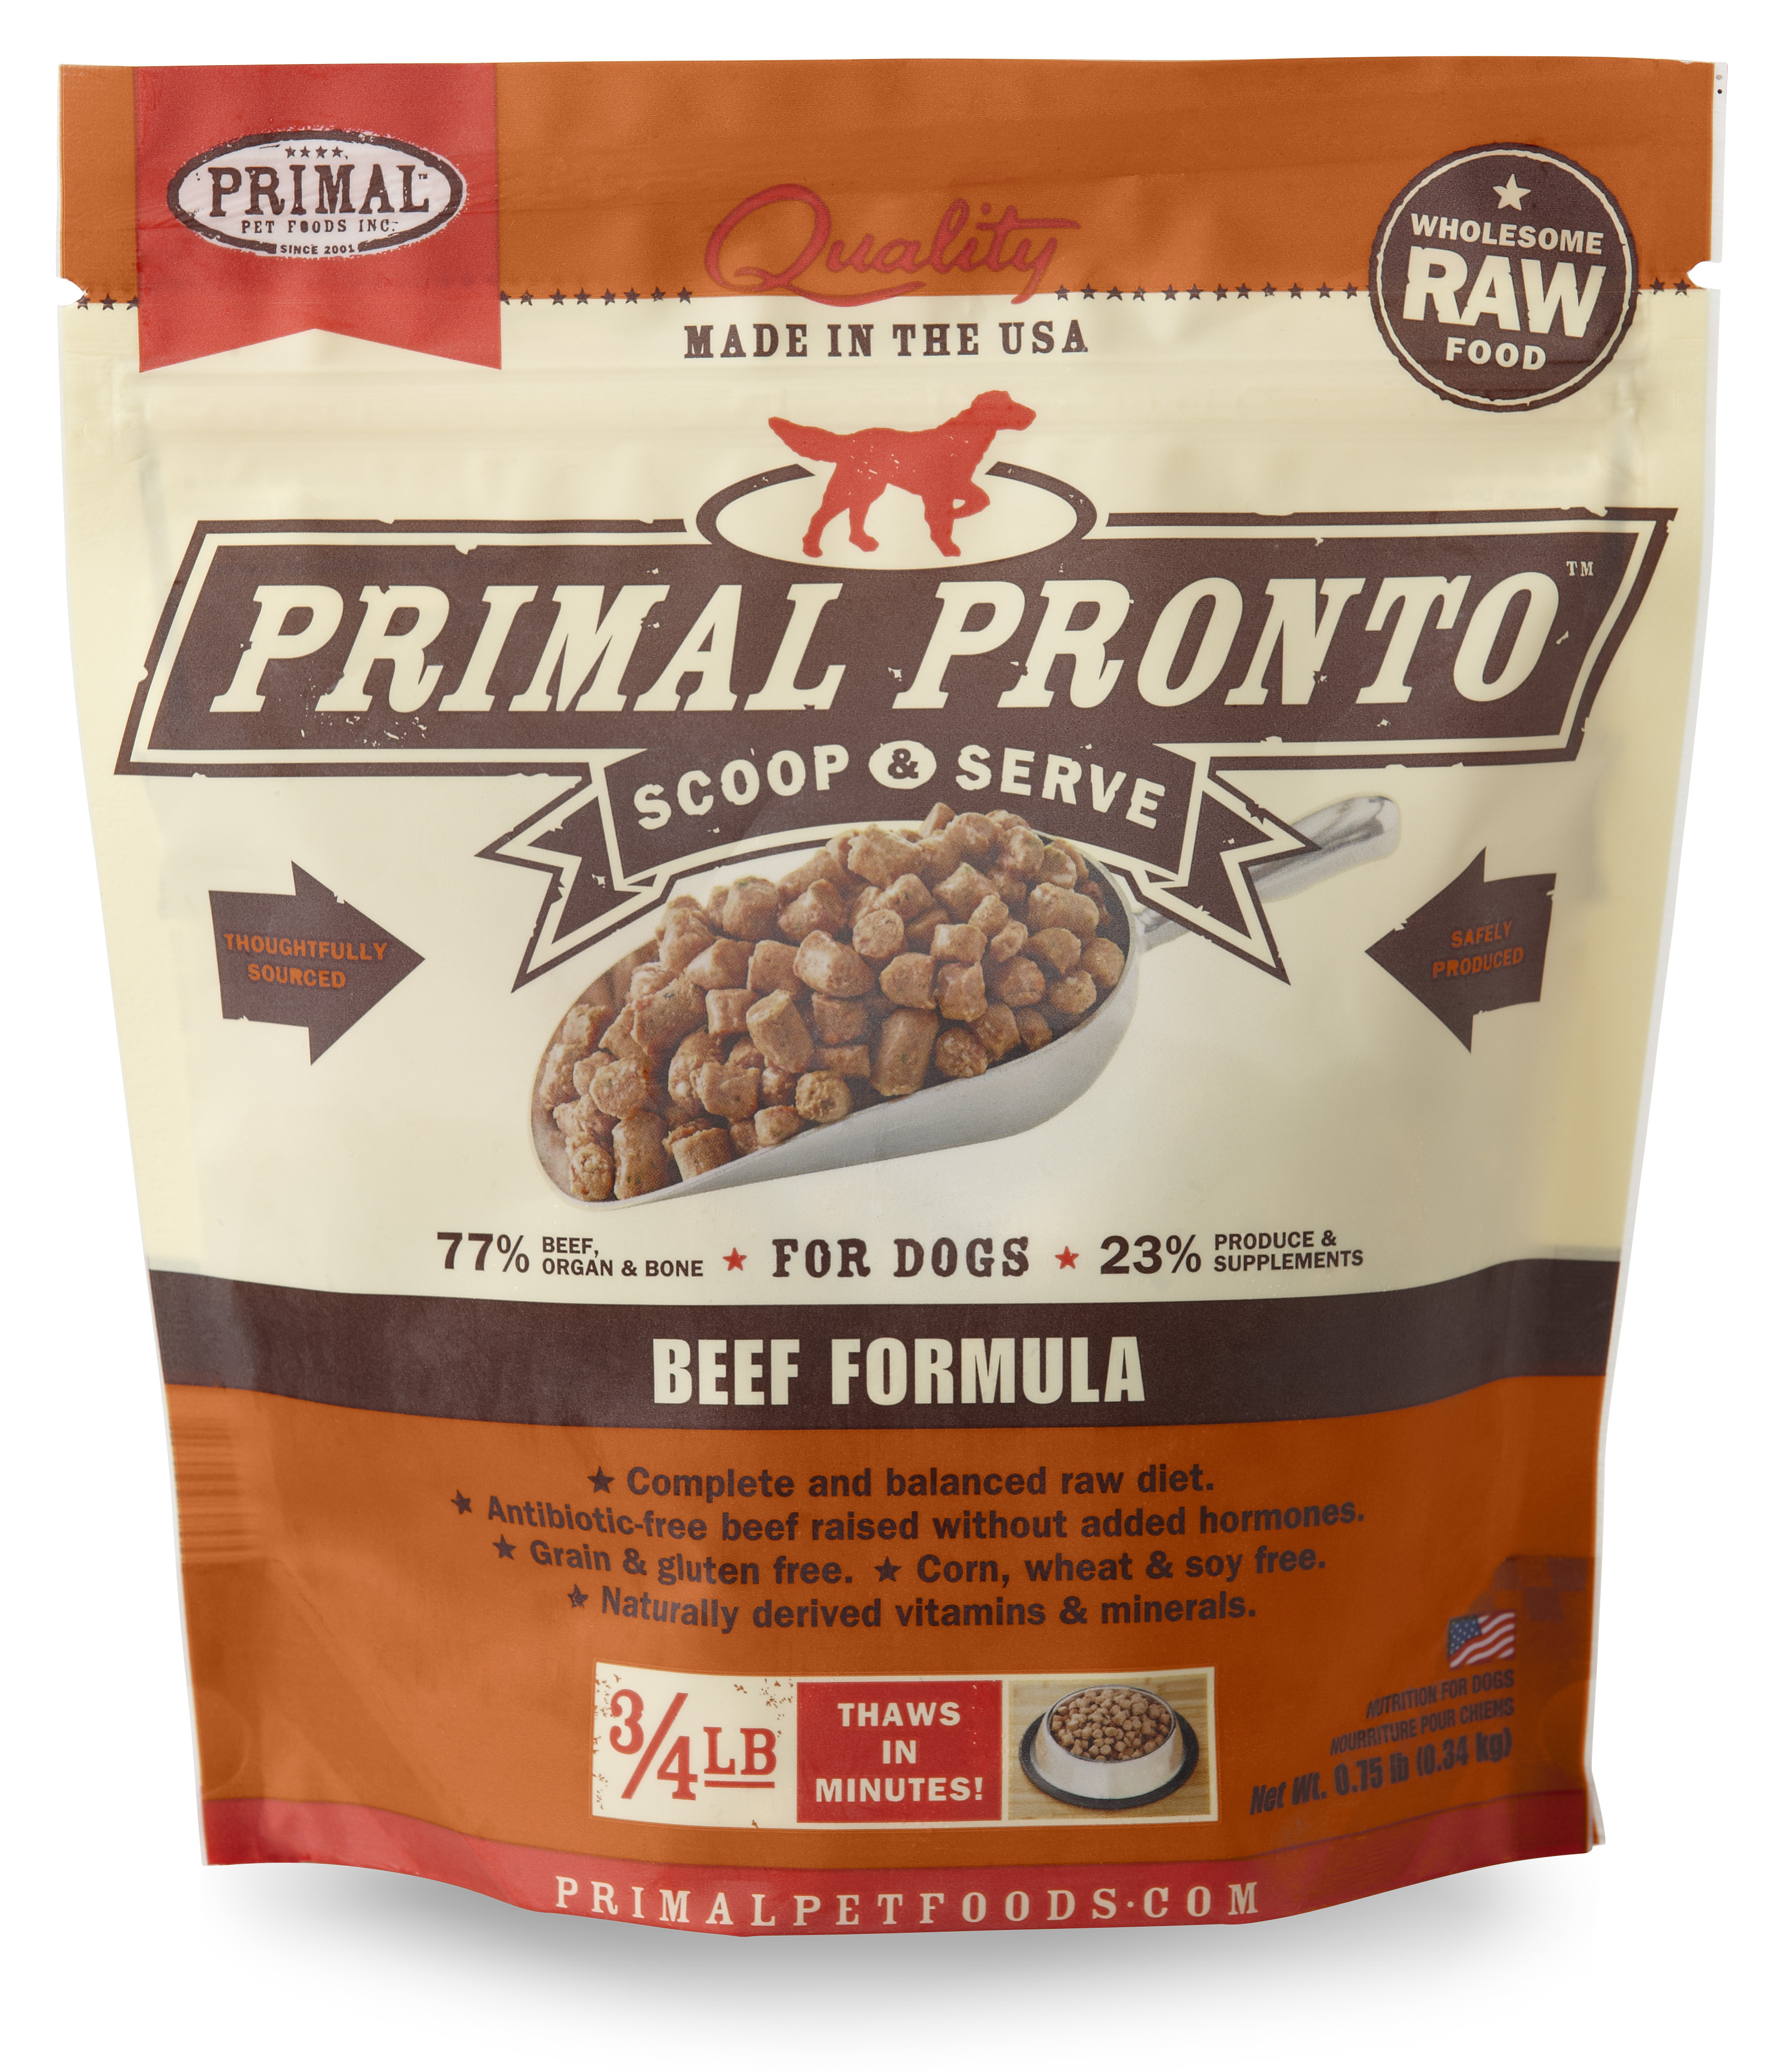 Primal Pronto Raw Frozen Canine Beef Formula, .75 lbs